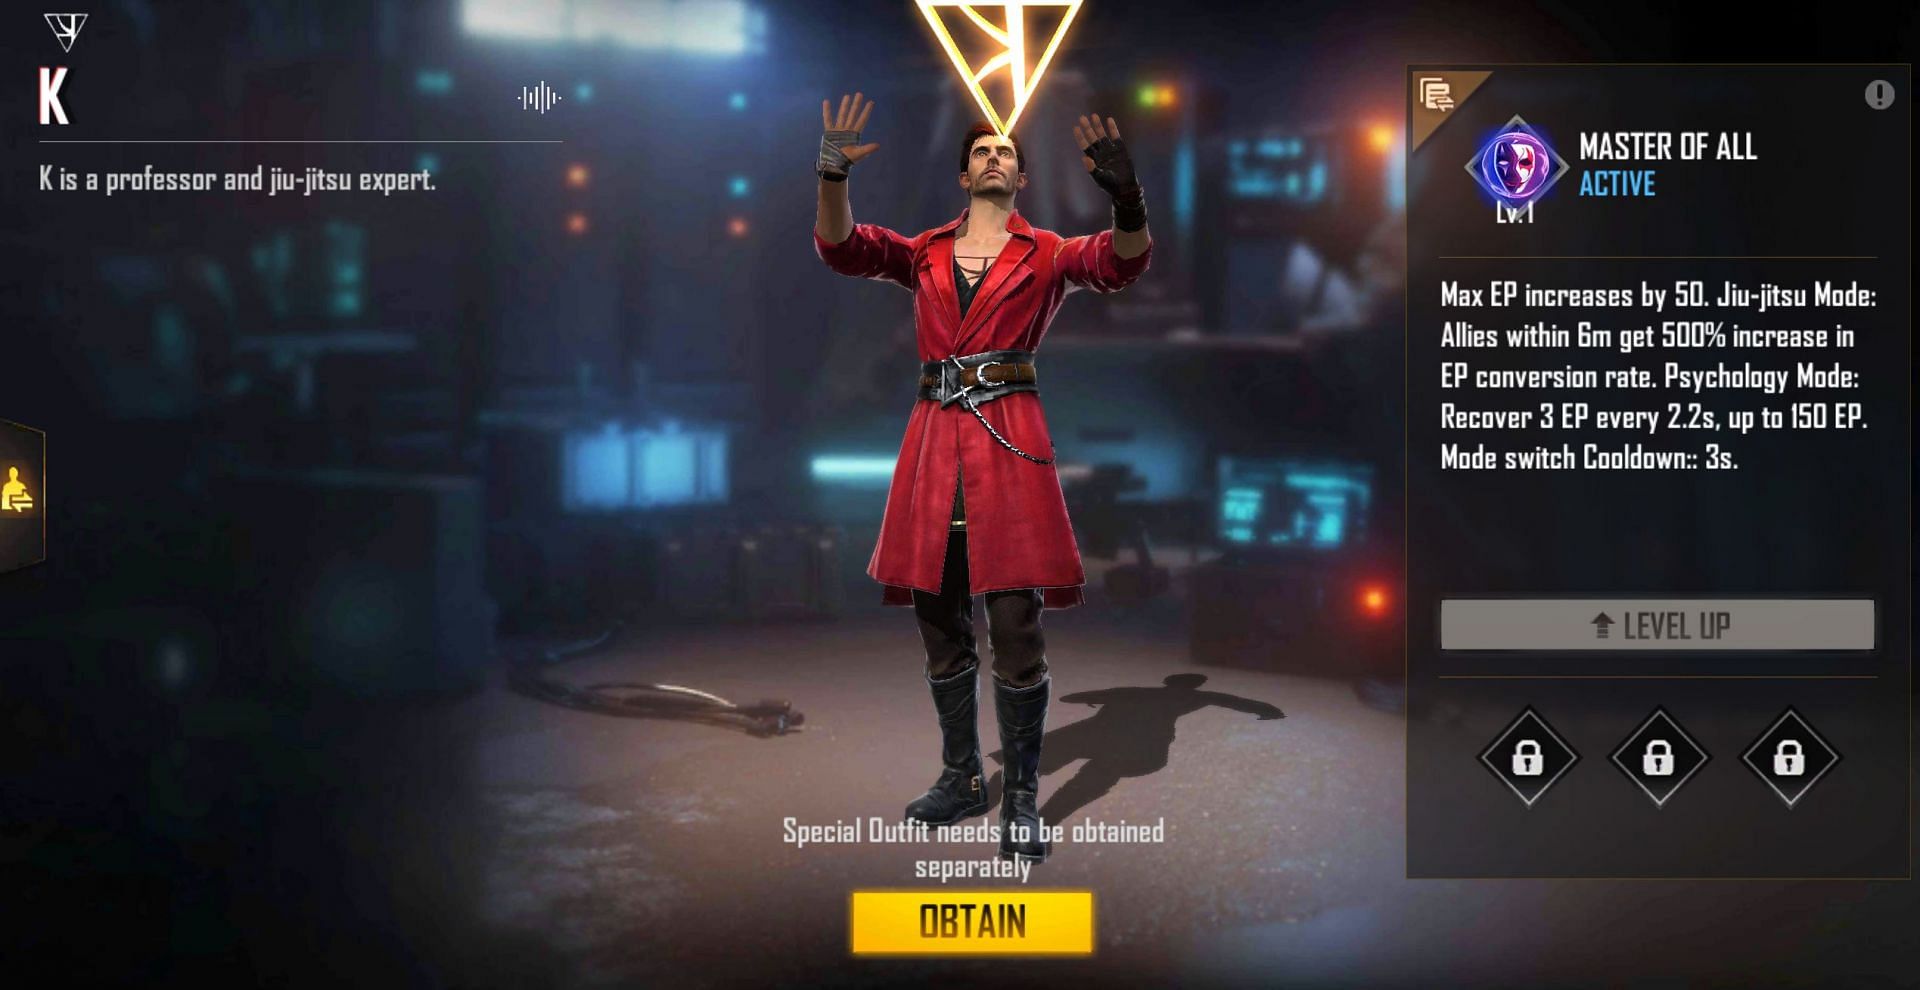 Ability of K & # 039; there are two separate modes (Image via Free Fire)